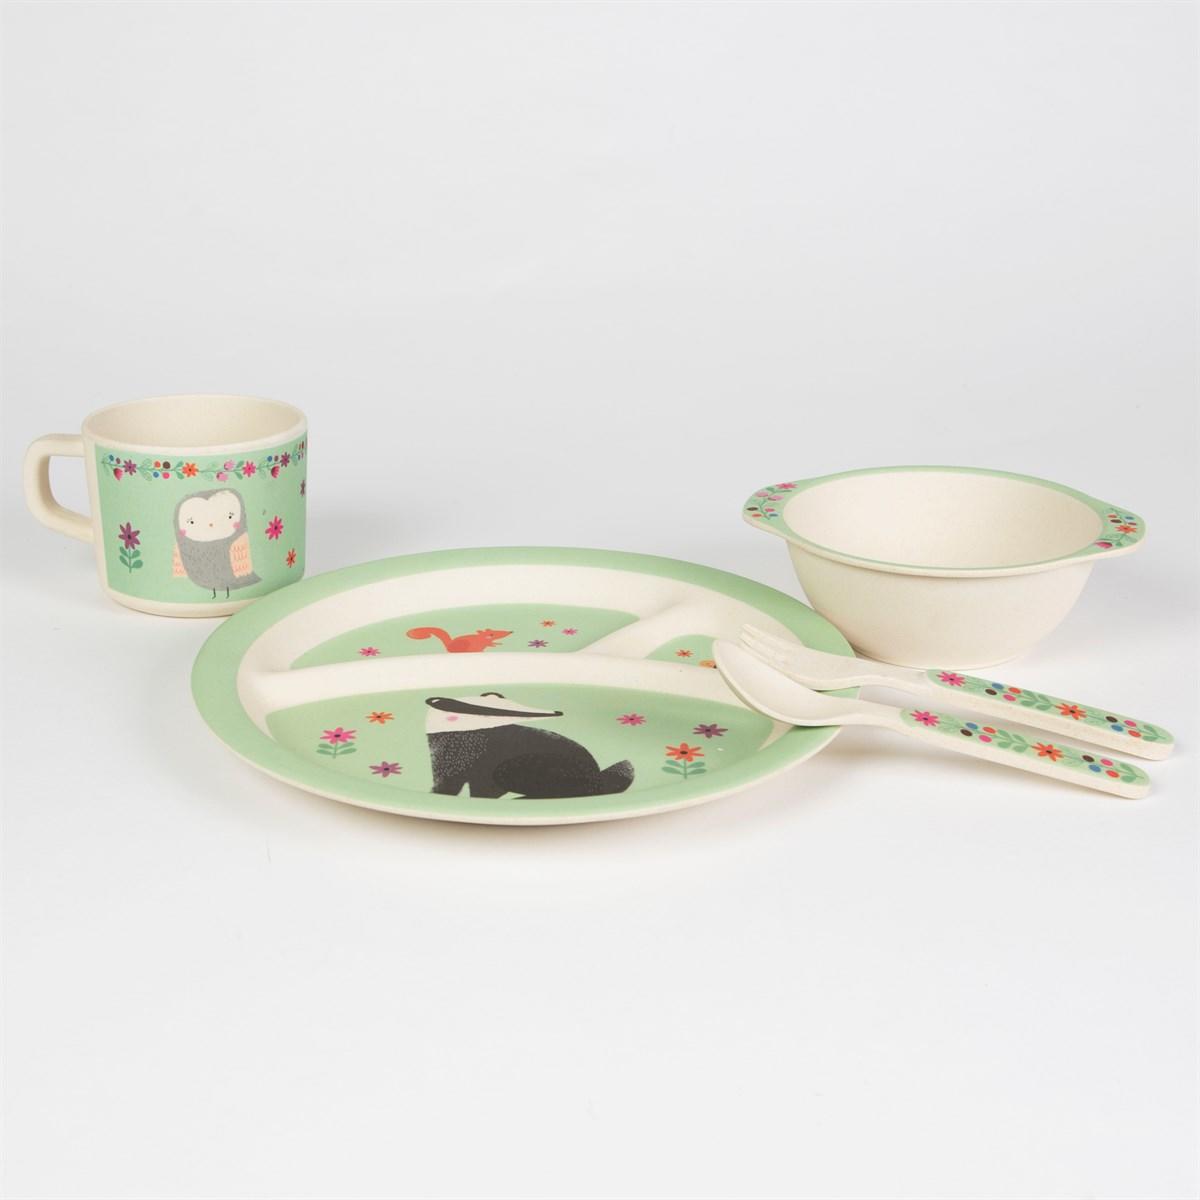 woodlands friends plate with set